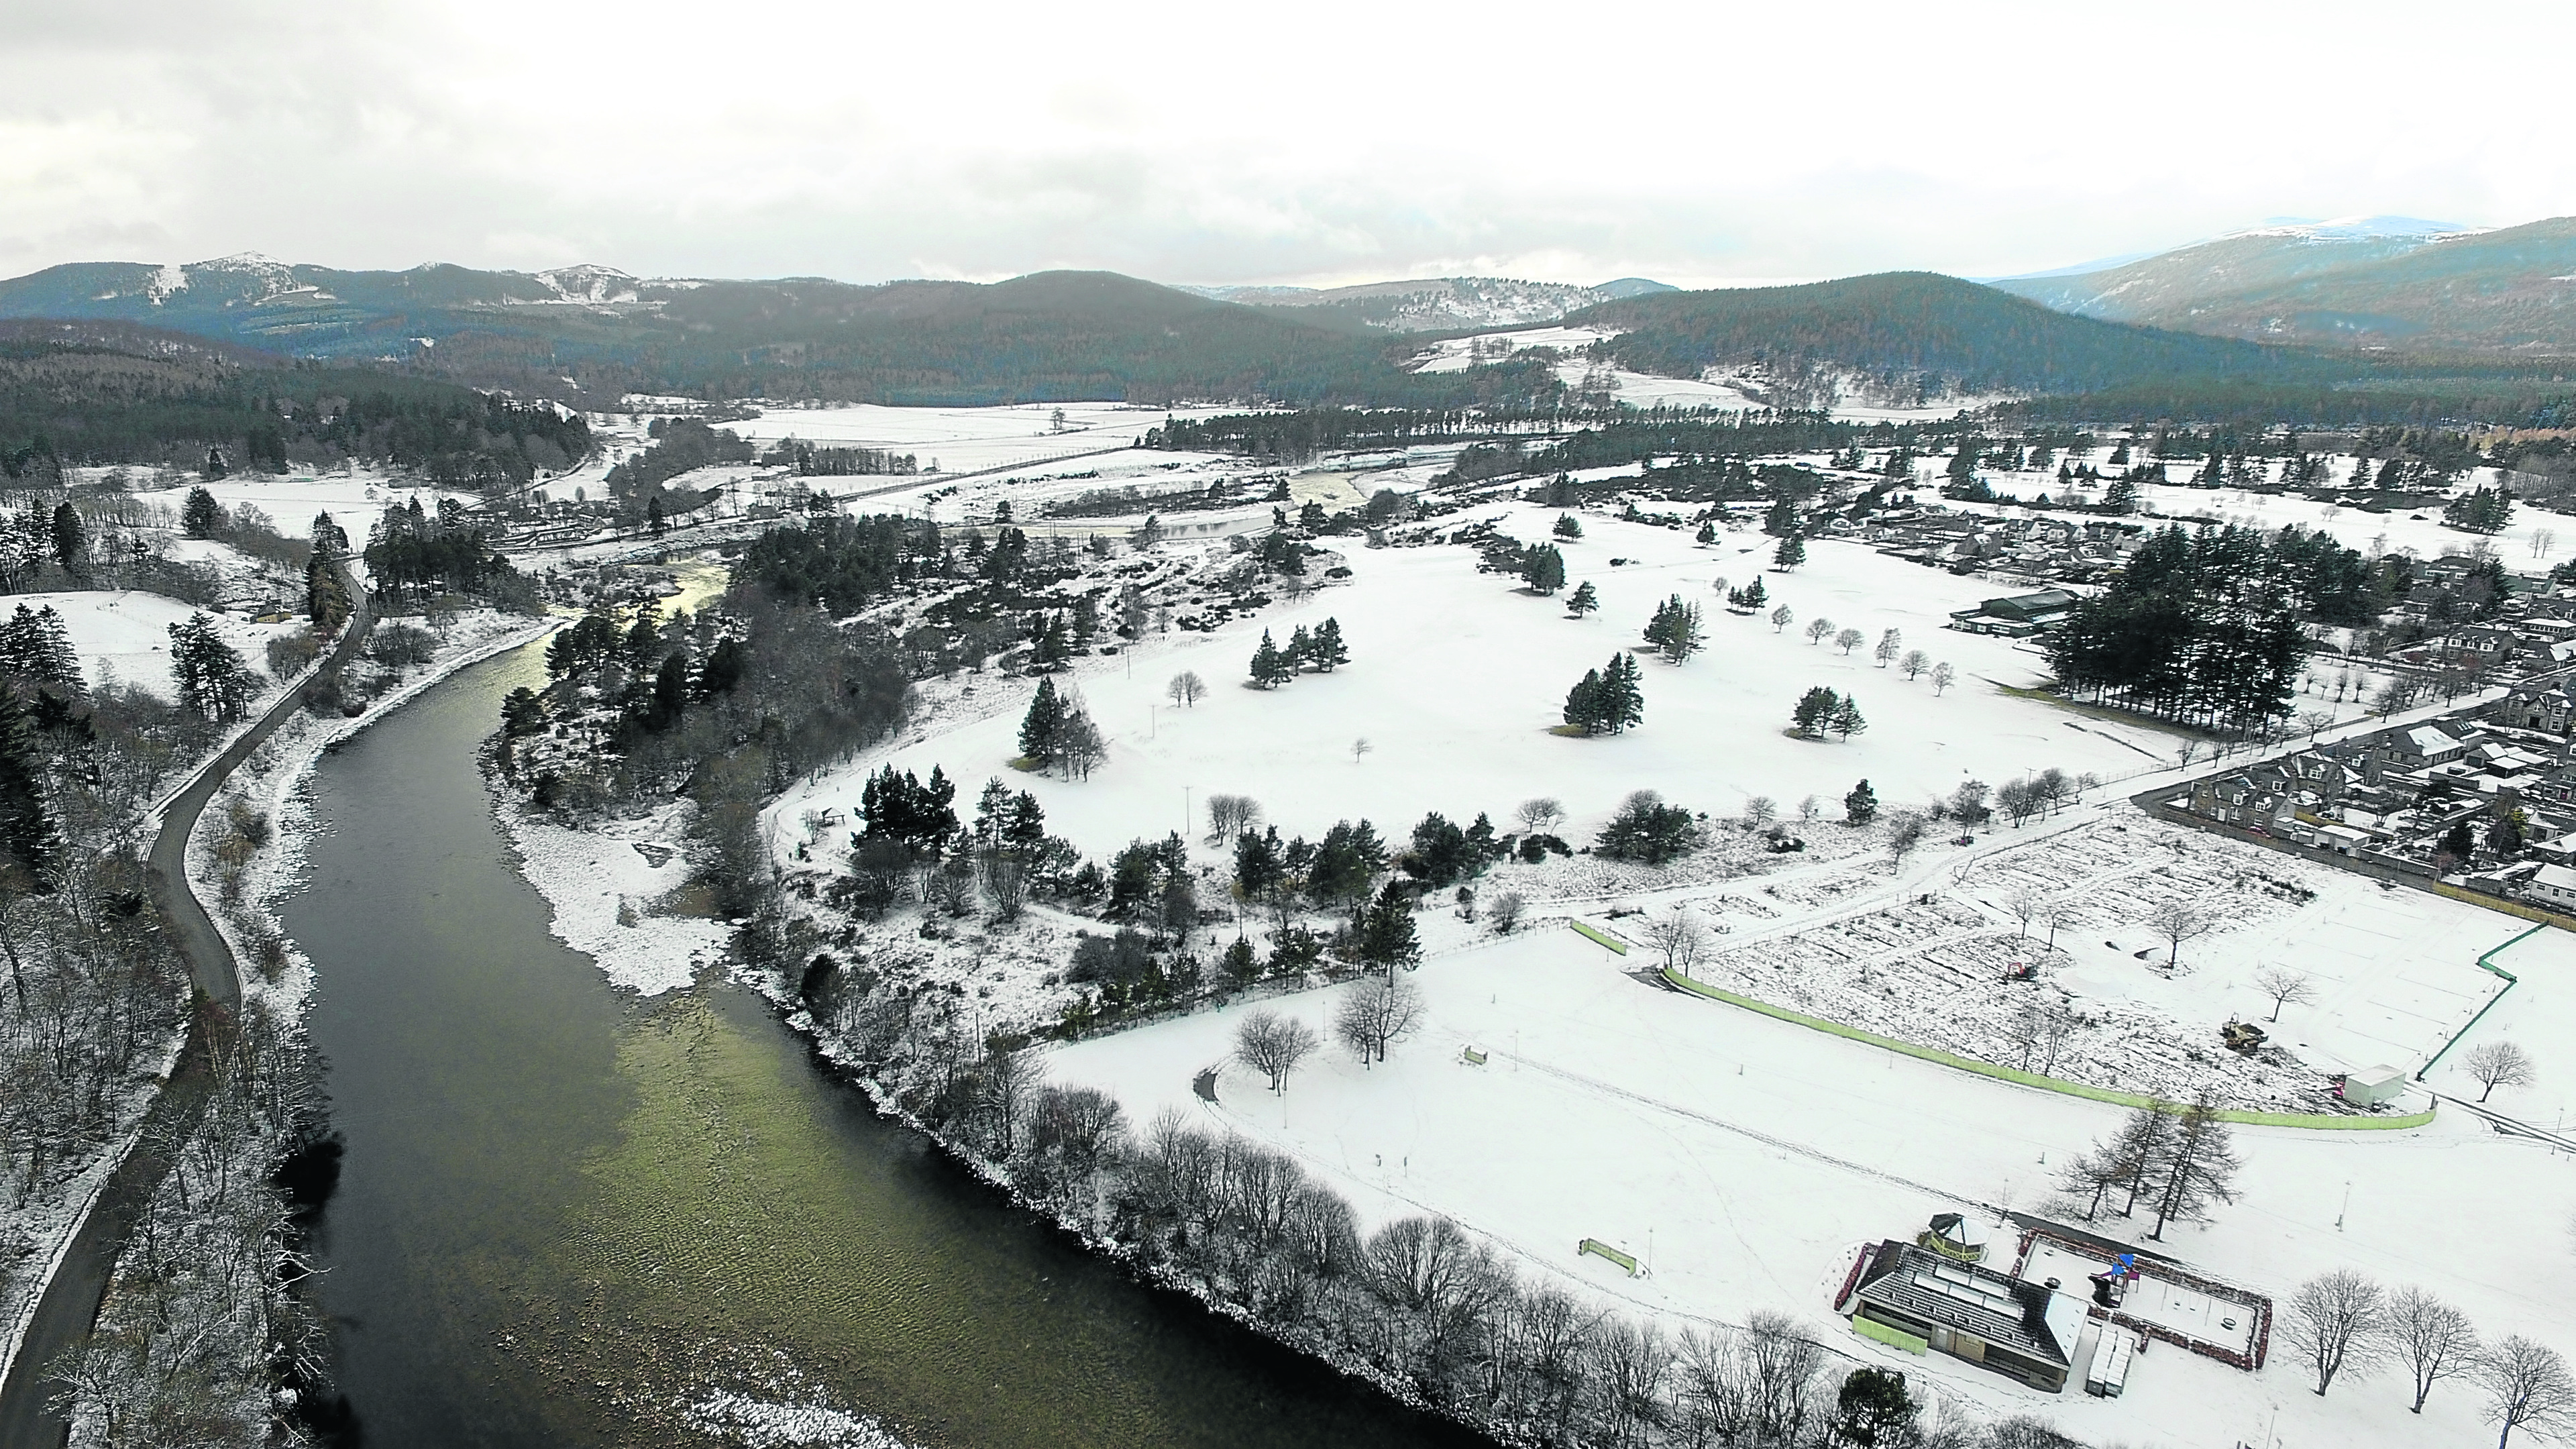 School closures across Aberdeenshire as snow from Beast from the East hits Scotland.
Snow covering Ballater area.

Aerial Image - Drone / Phantom 3 advanced.

Picture by KENNY ELRICK     27/02/2018